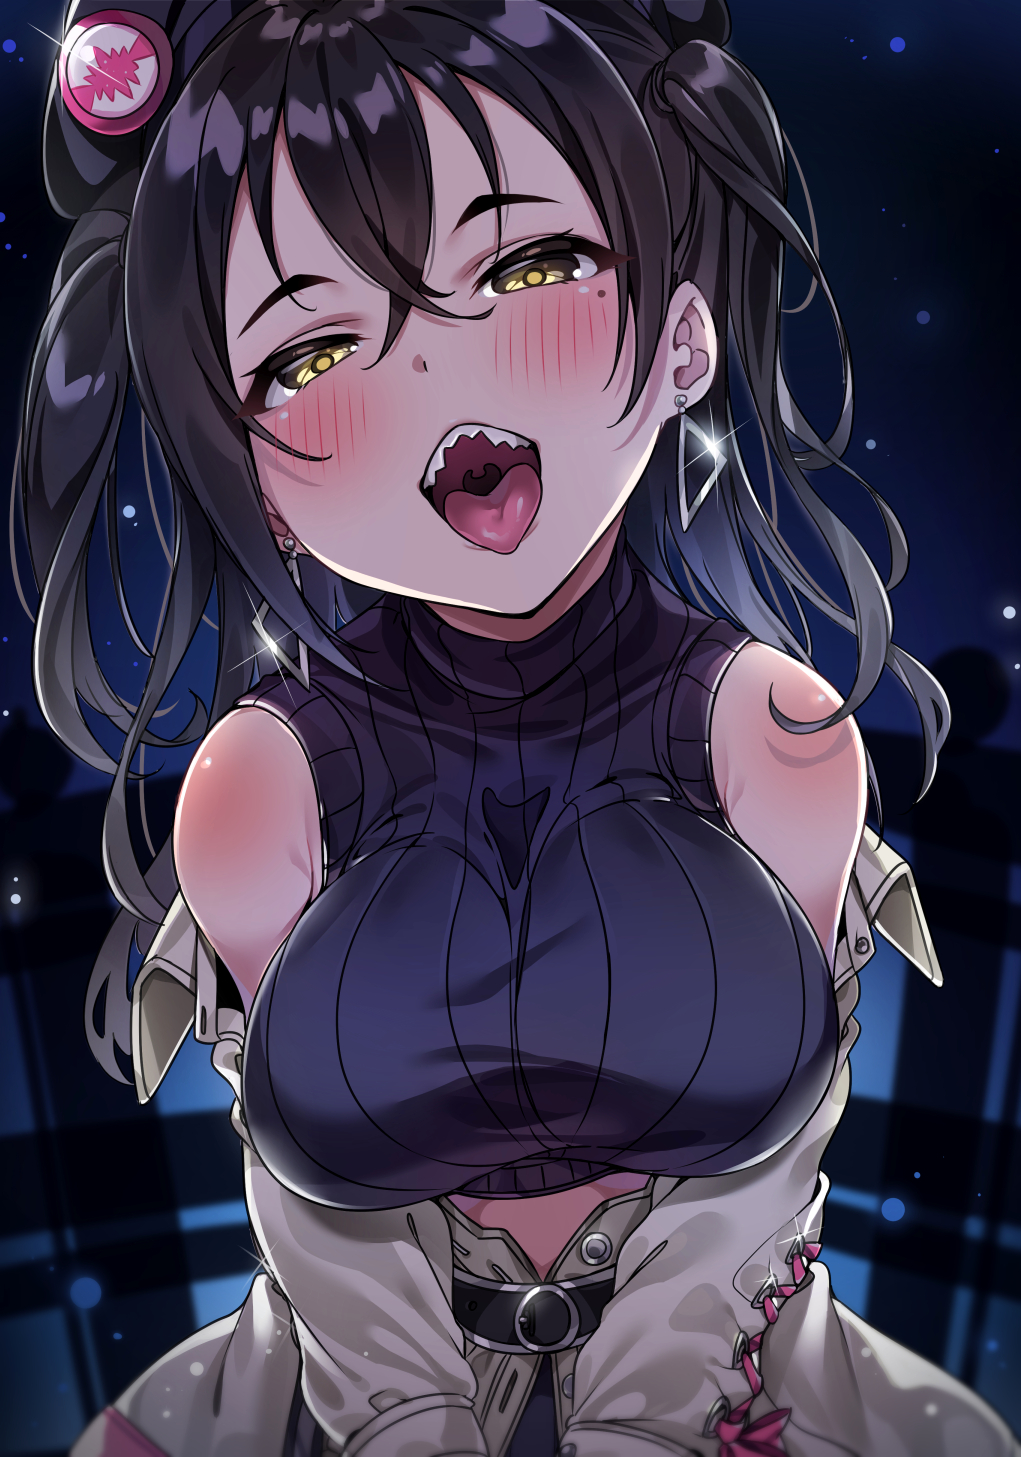 Anime 1021x1457 anime girls anime open mouth yellow eyes tongue out suggestive blushing frontal view night implied sex